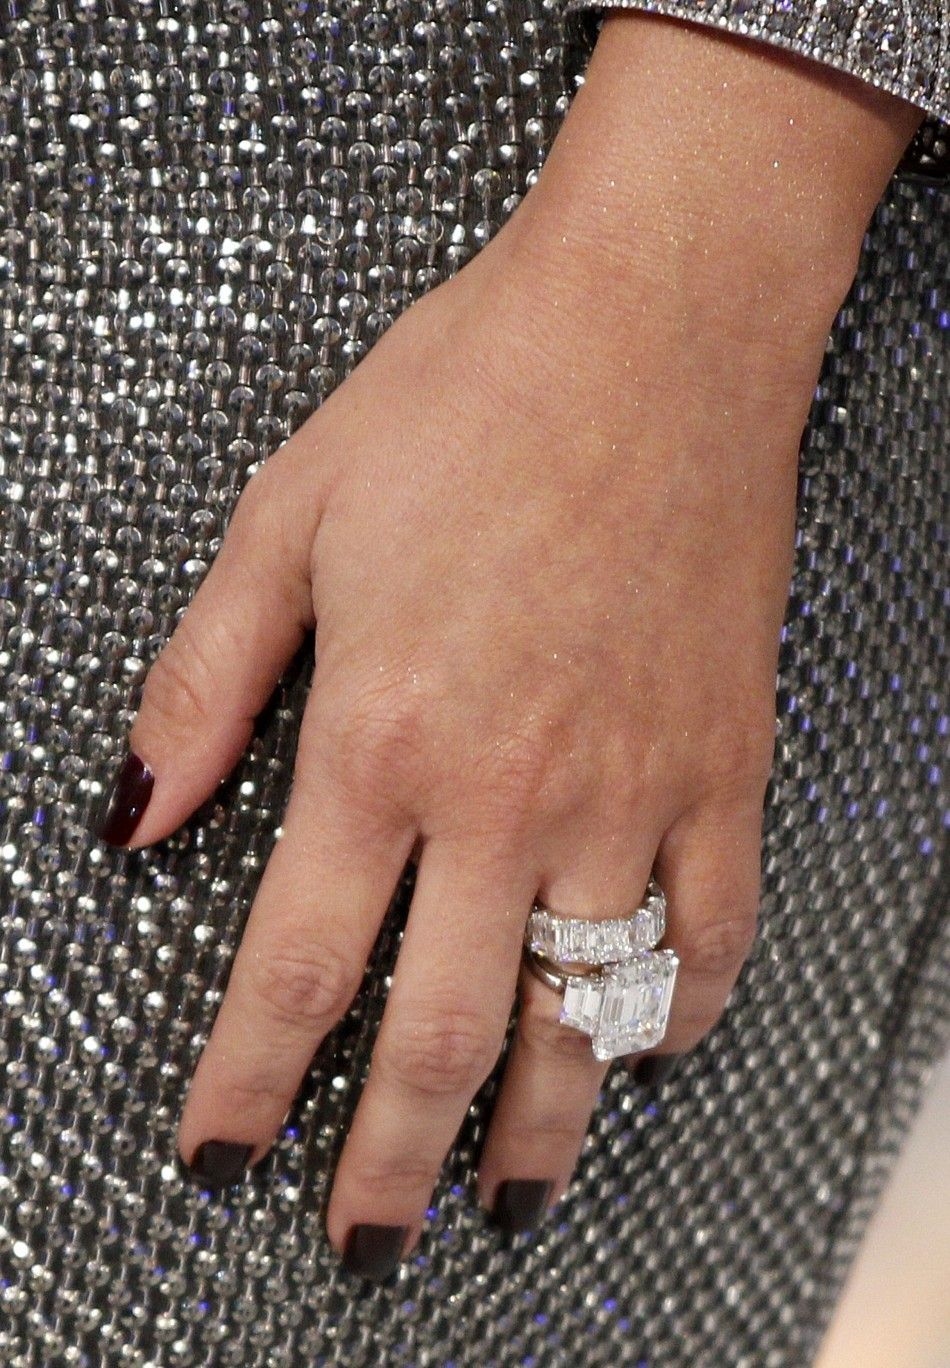 Newly-Wed Kim Kardashian Shows Off Her Wedding Ring at the 2011 MTV Video Music Awards.